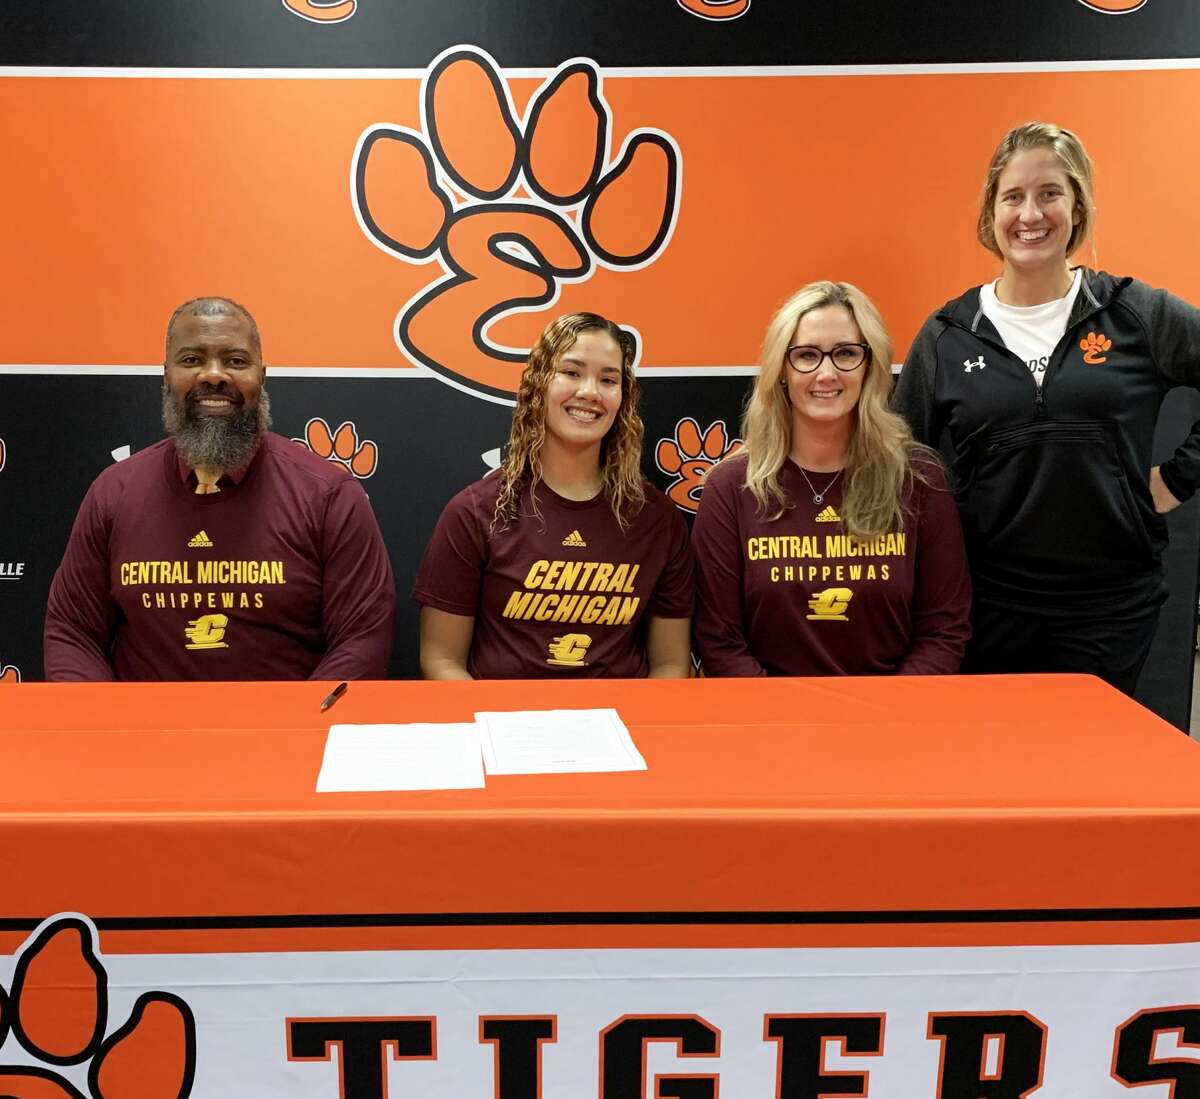 Edwardsville senior Sydney Harris, seated center, will play college basketball for Central Michigan. She is joined by her parents and EHS coach Caty Happe.